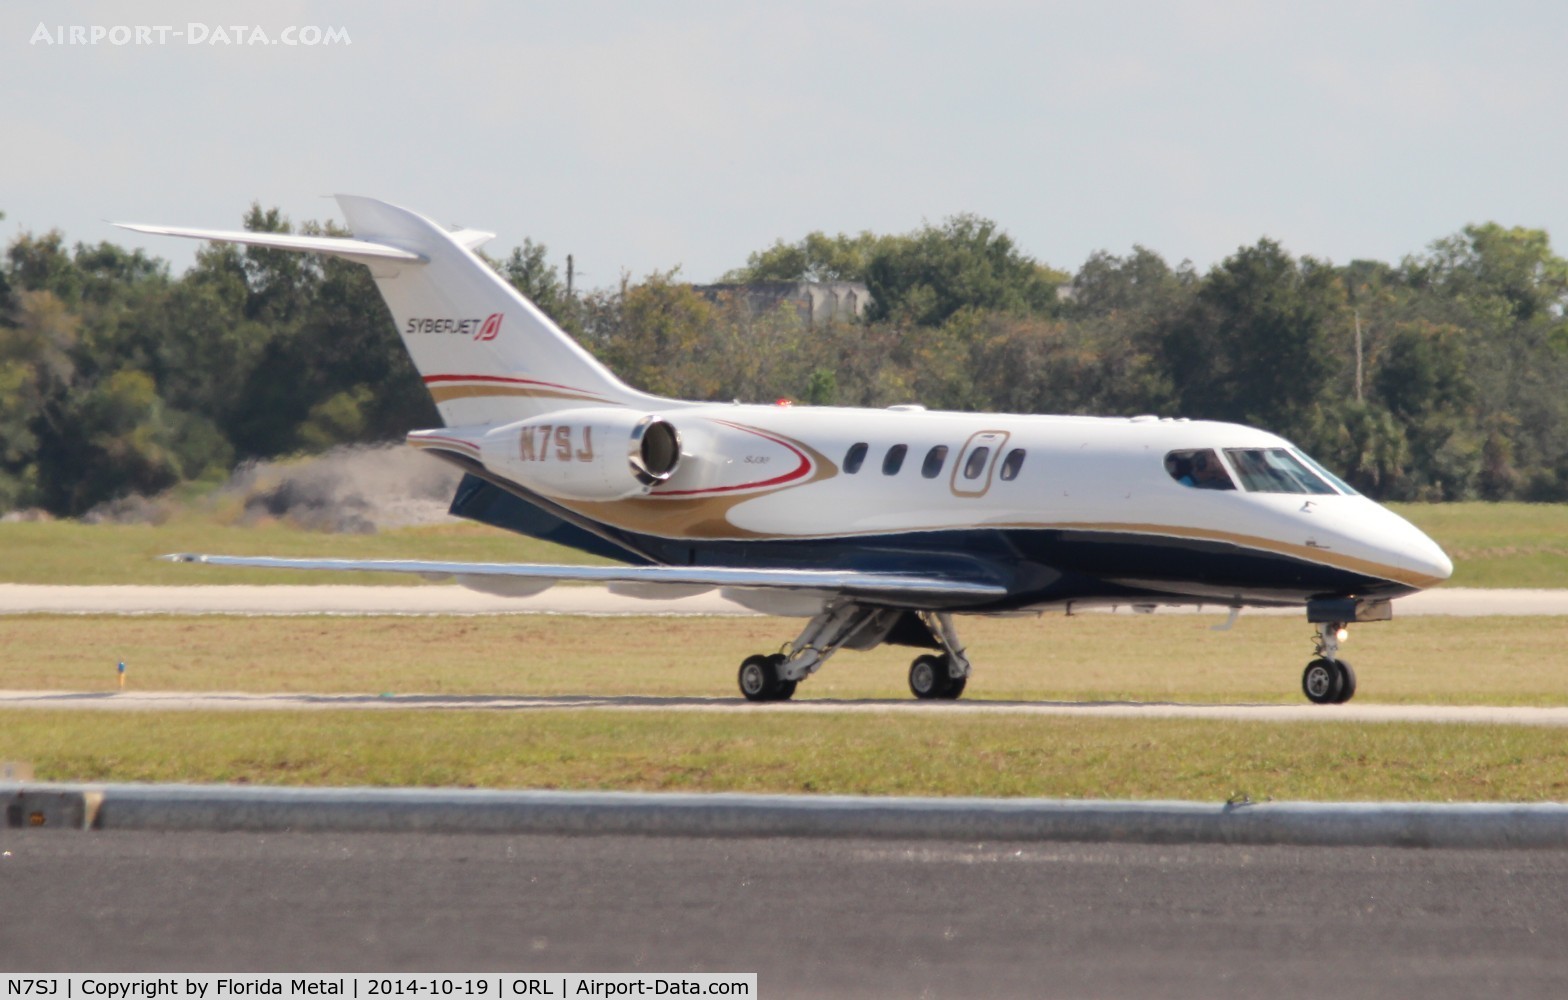 N7SJ, 2007 Sino Swearingen SJ30-2 C/N 007, SJ30-2 said to have once been owned by Bill Cosby